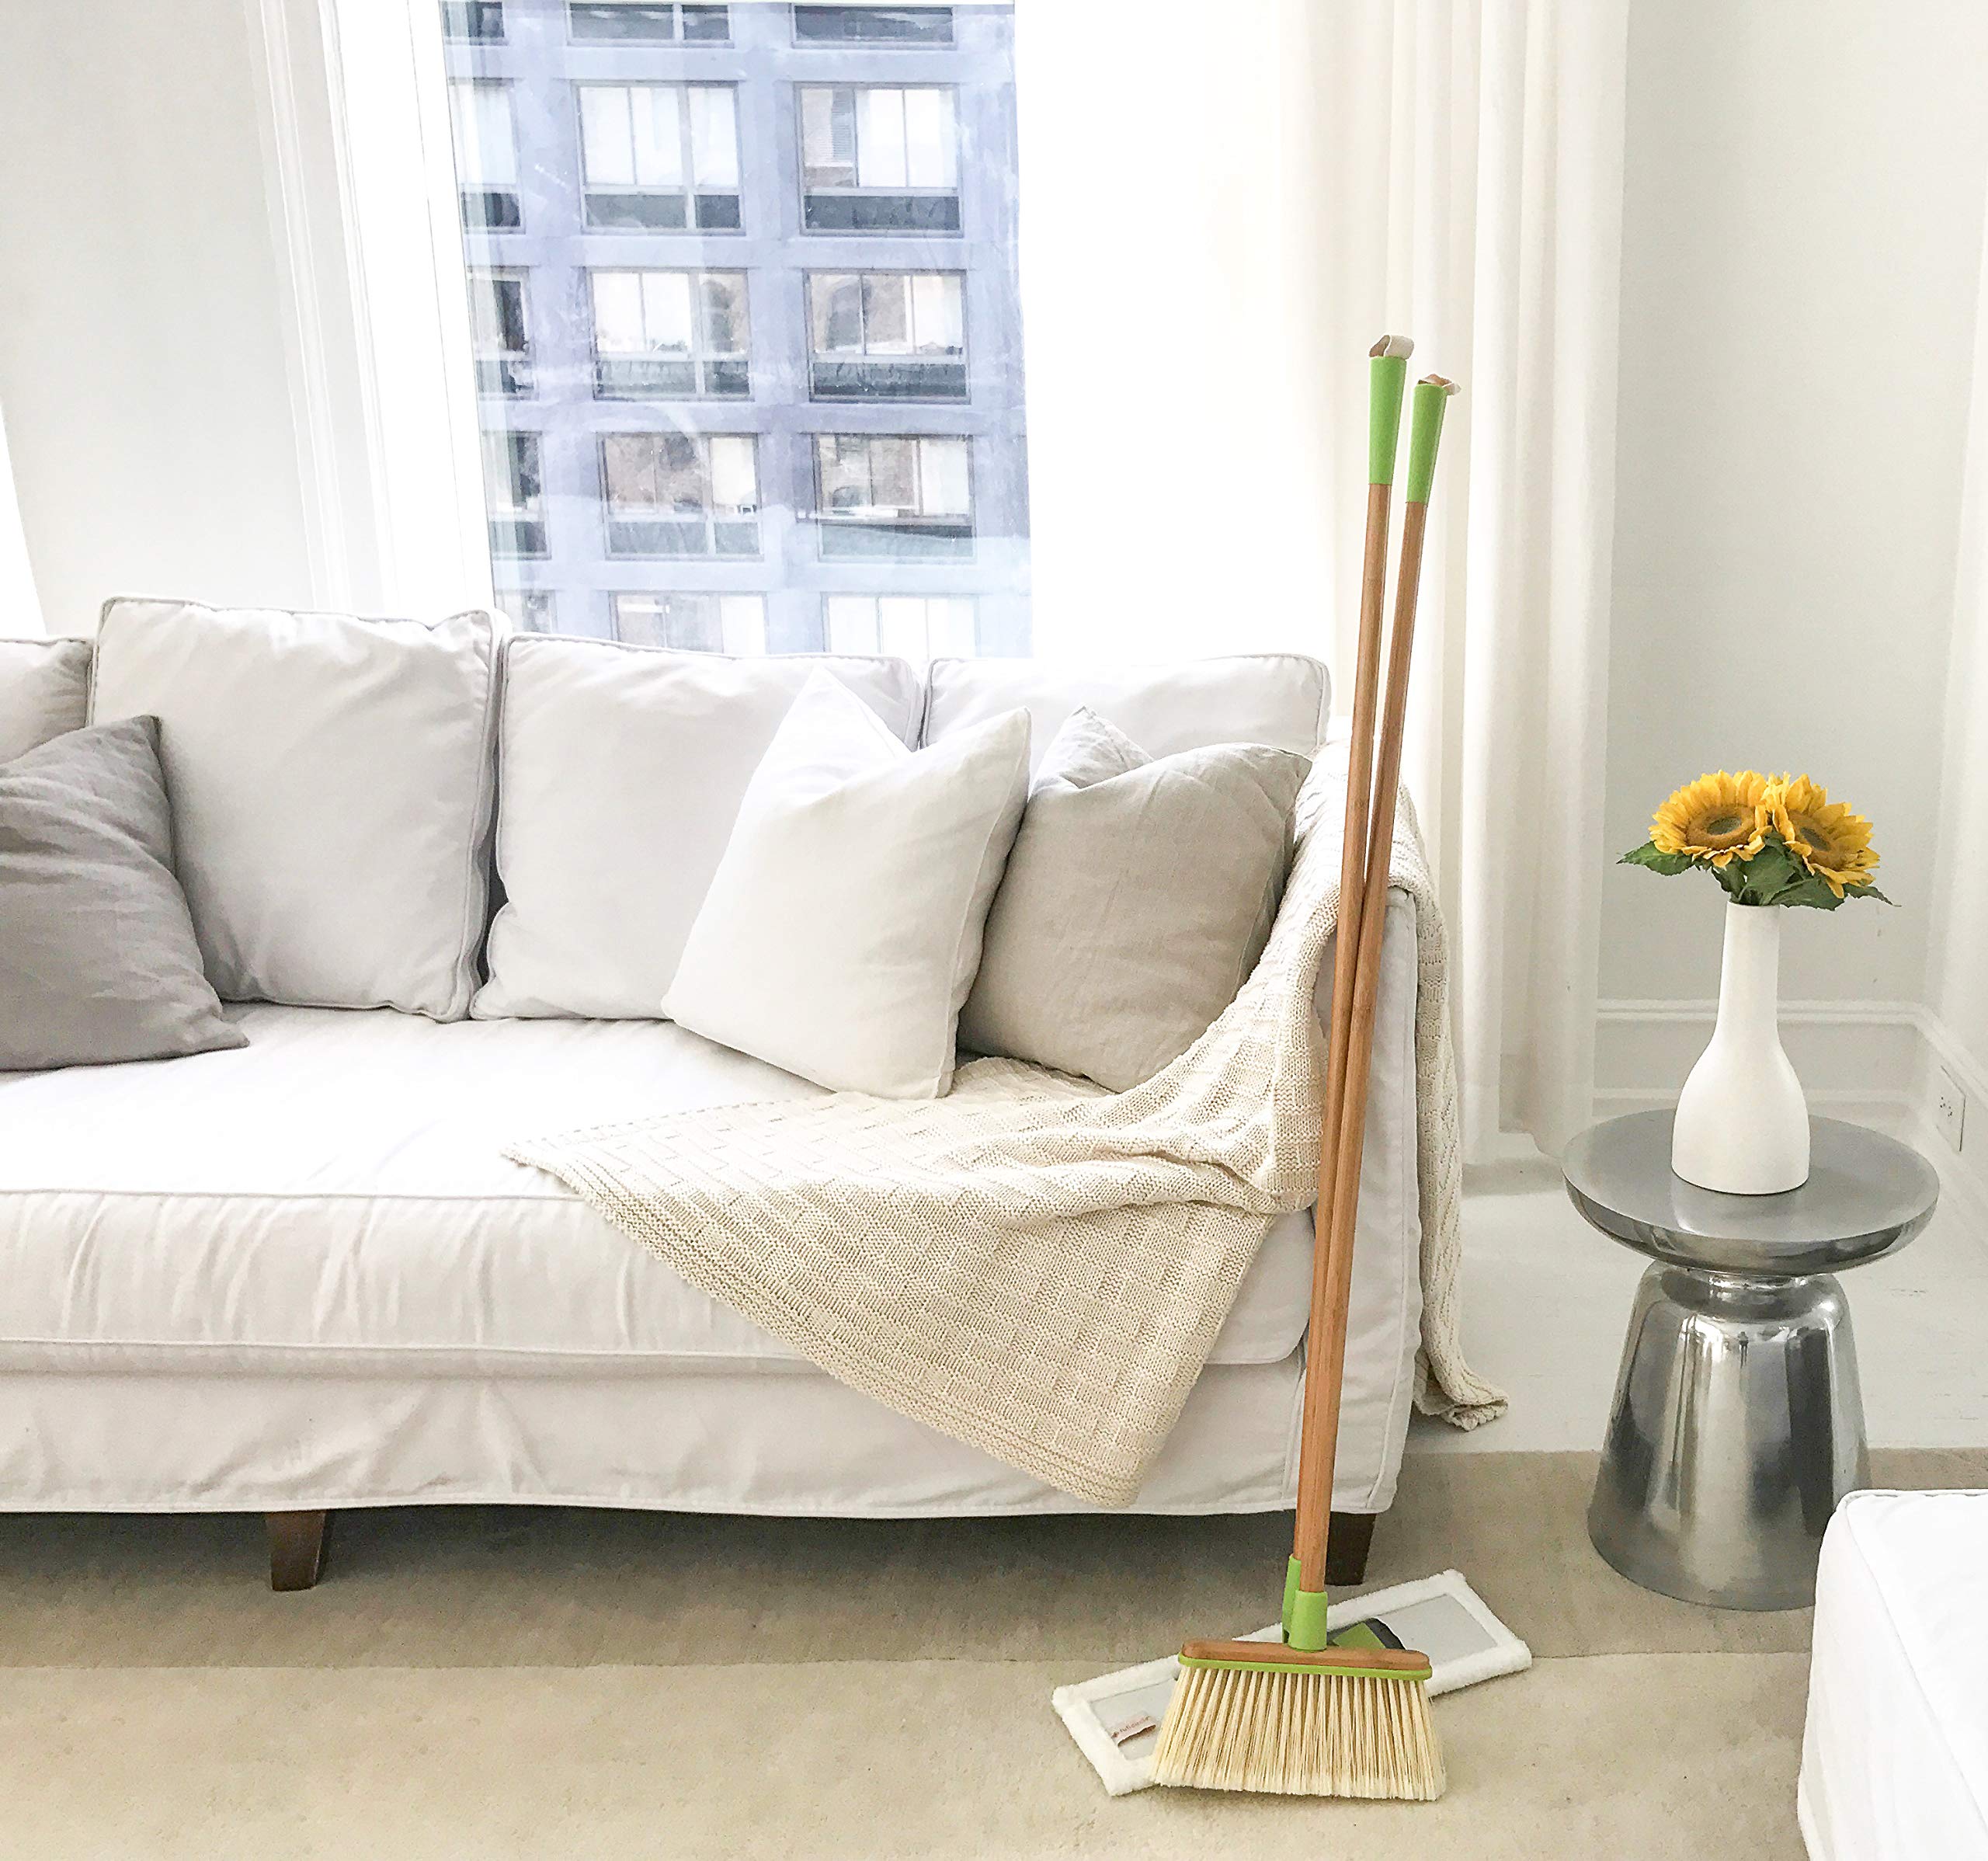 Full Circle Sweep Home Cleaning, Broom, White